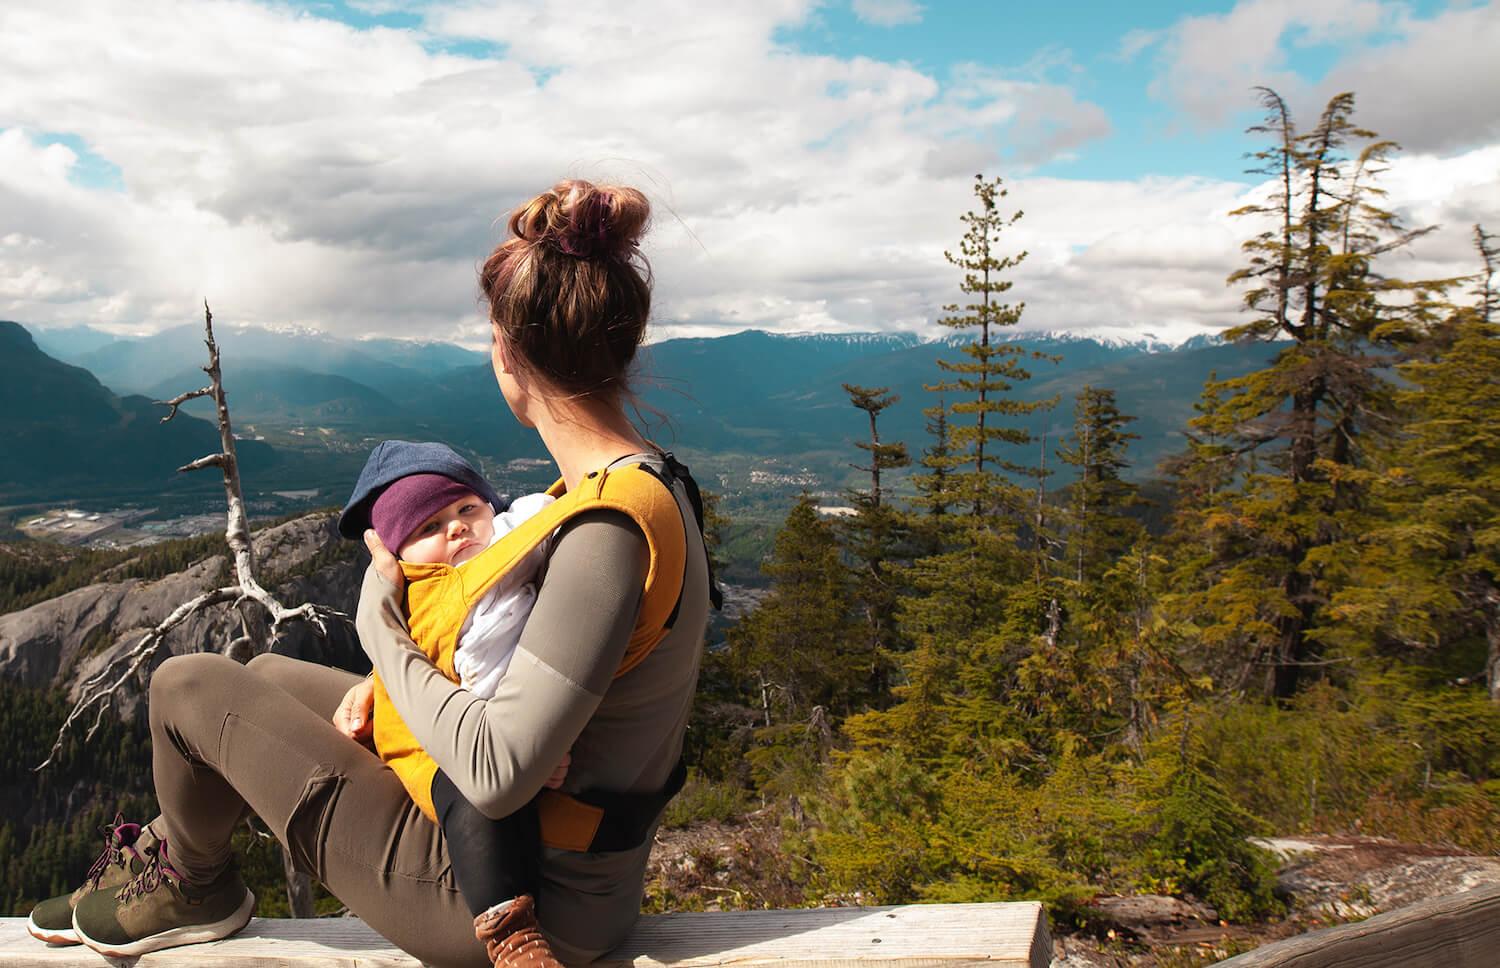 a woman sitting on a bench with a baby in her arms, looking at the landscape behind them